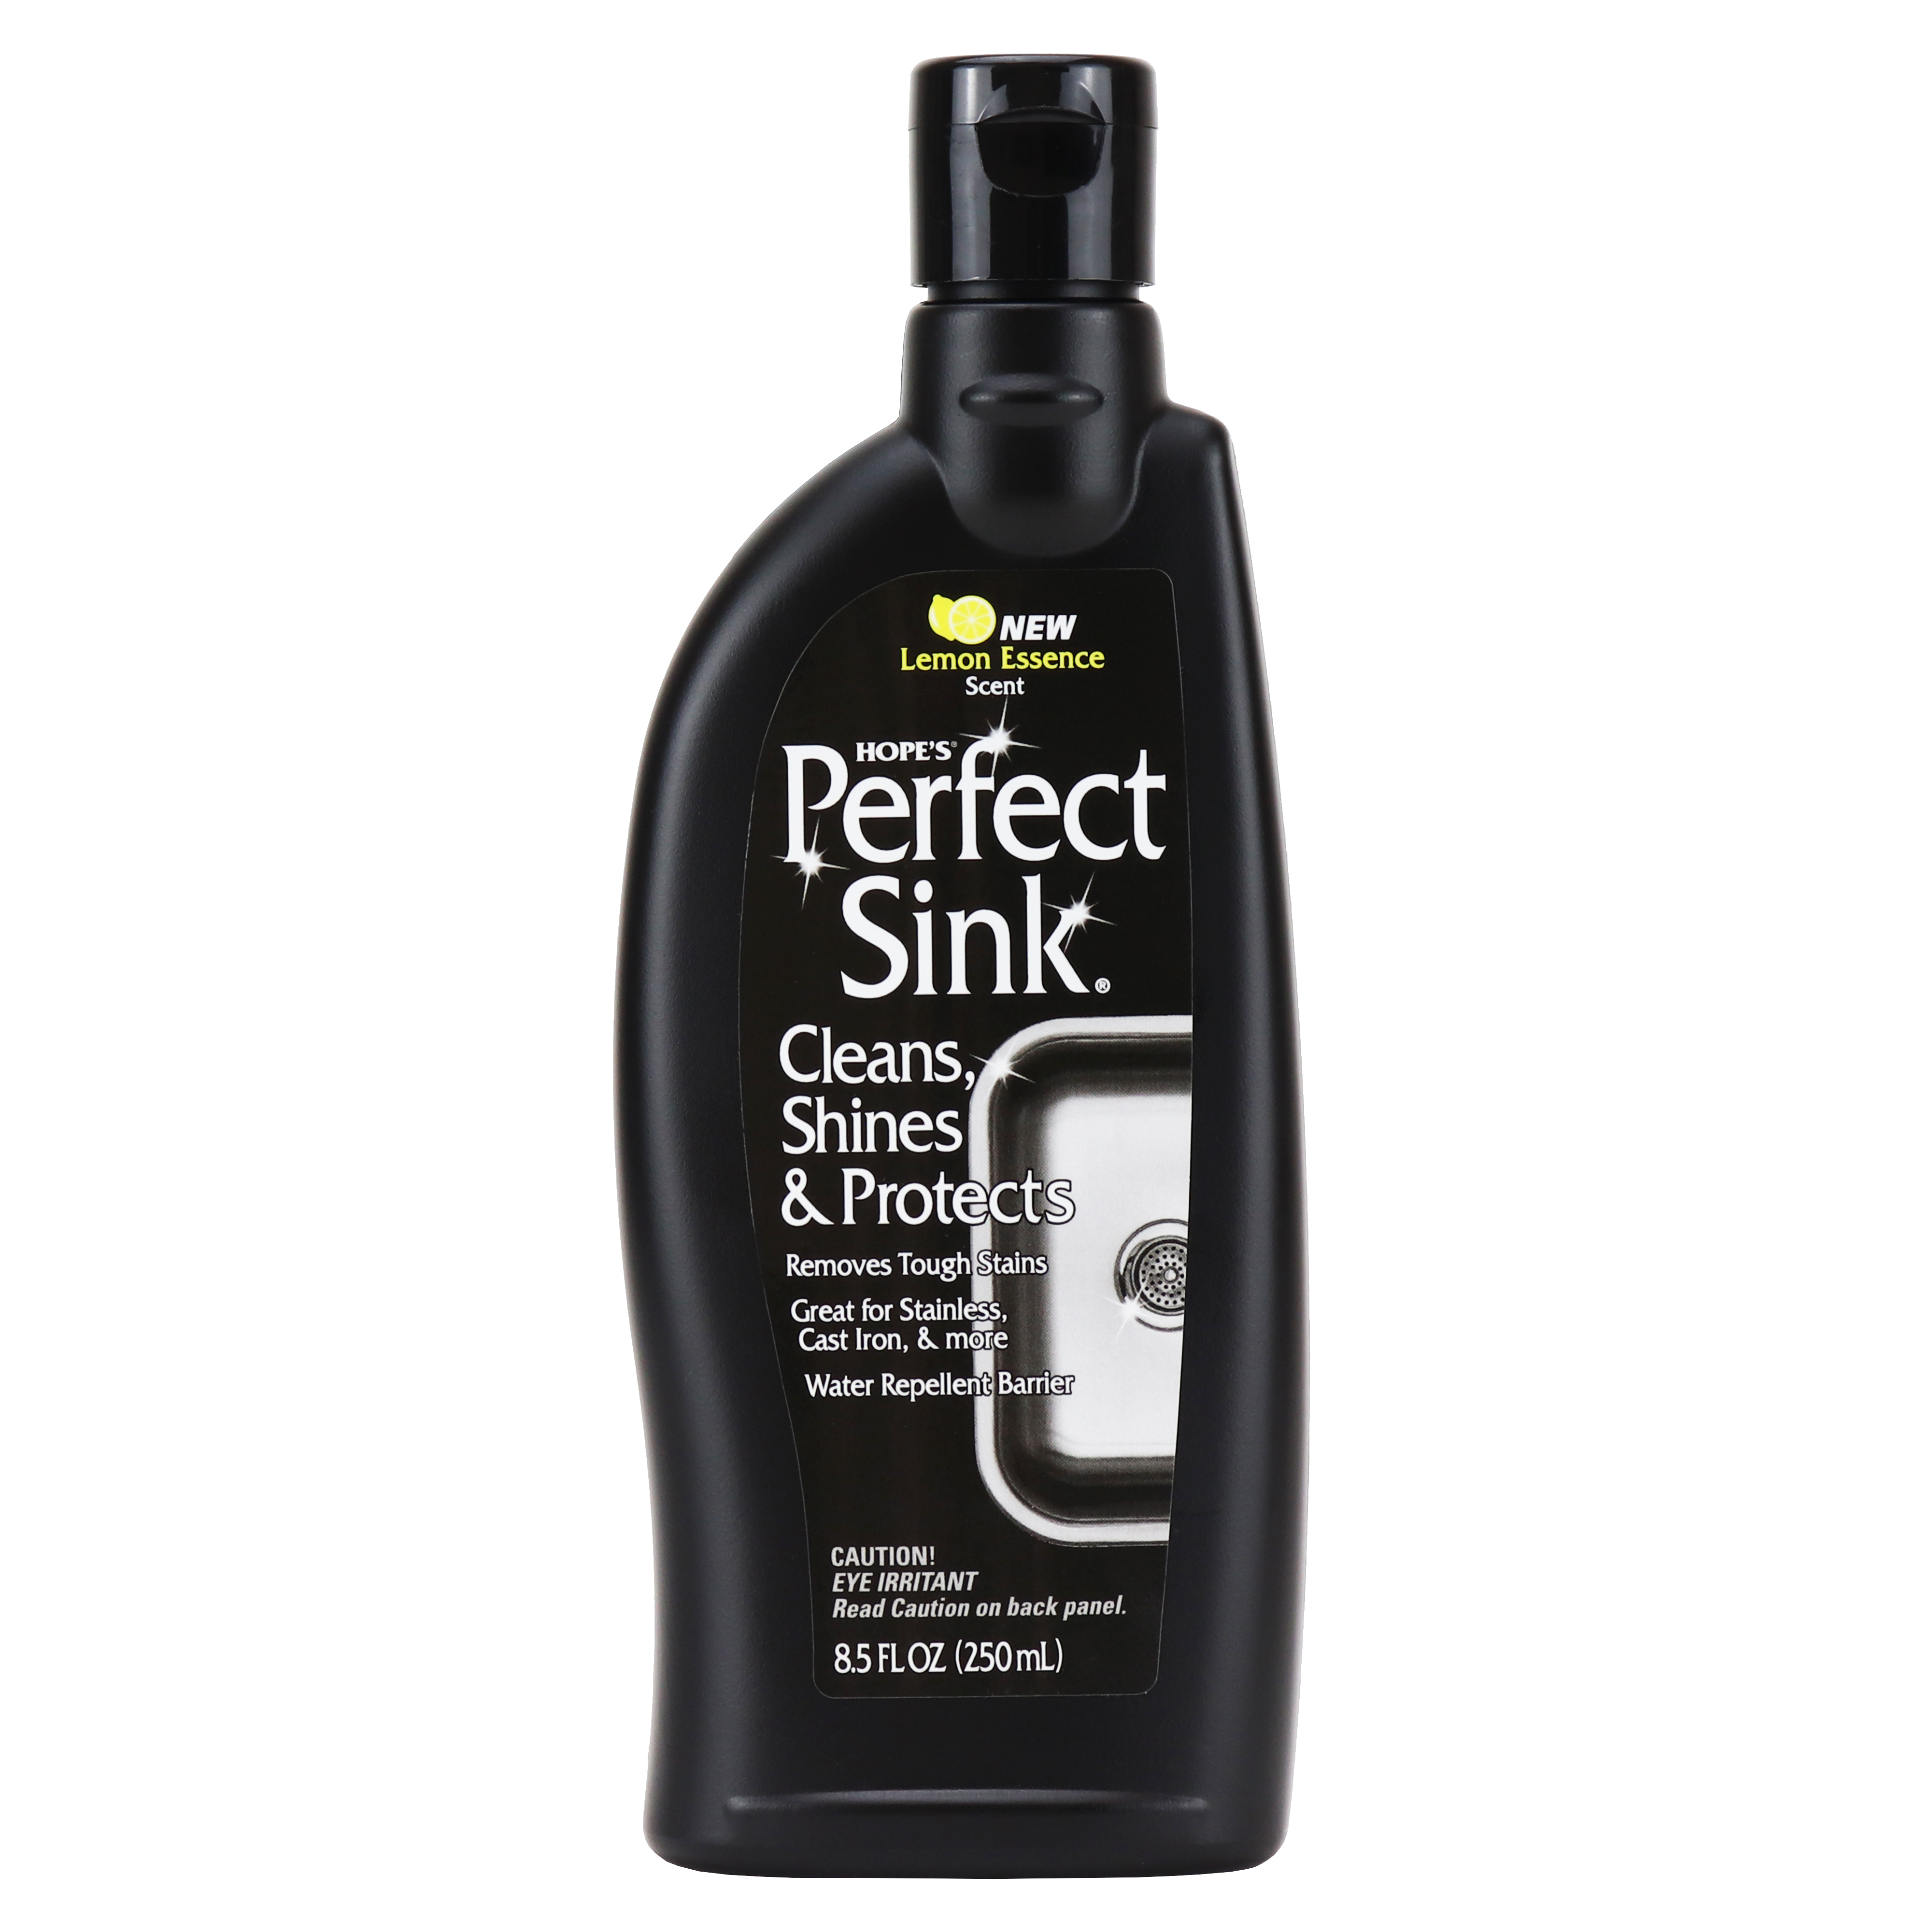 Hope's Perfect Sink Cleaner and Polish, Restorative, Removes Stains, Cast Iron, Corian, Composite, Acrylic, 8.5 Fl Oz - image 1 of 9